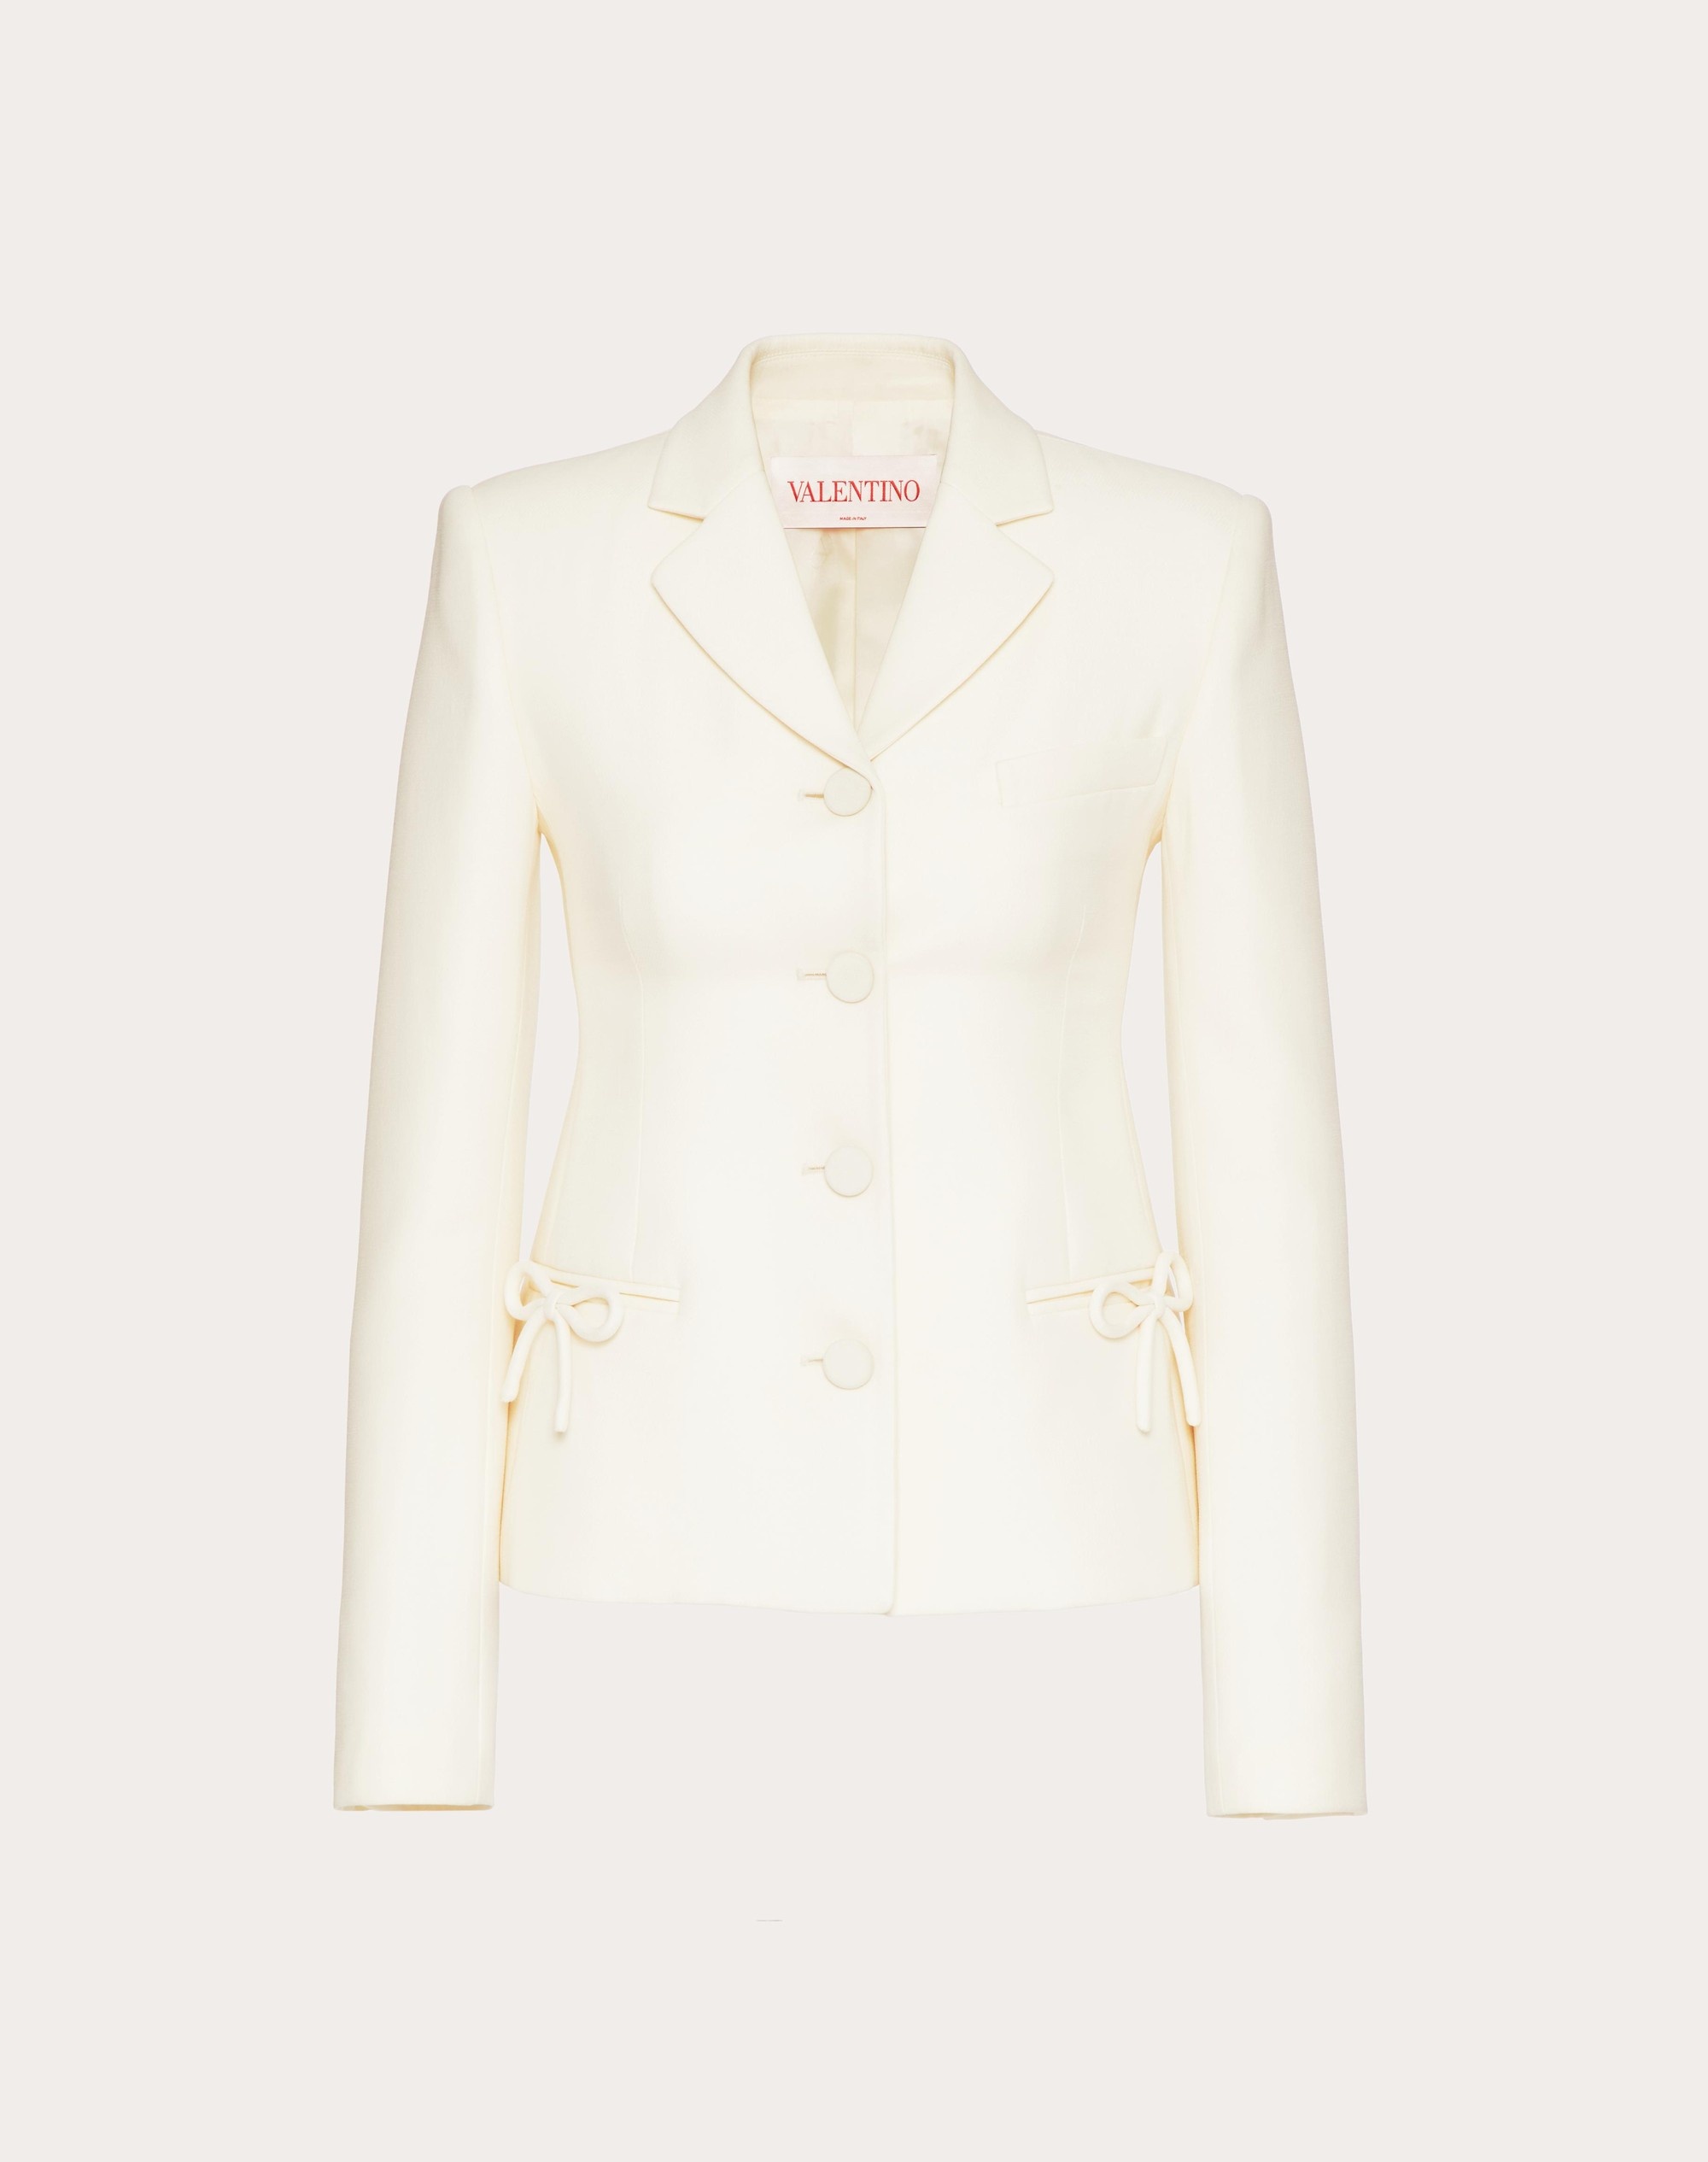 CREPE COUTURE JACKET - 1